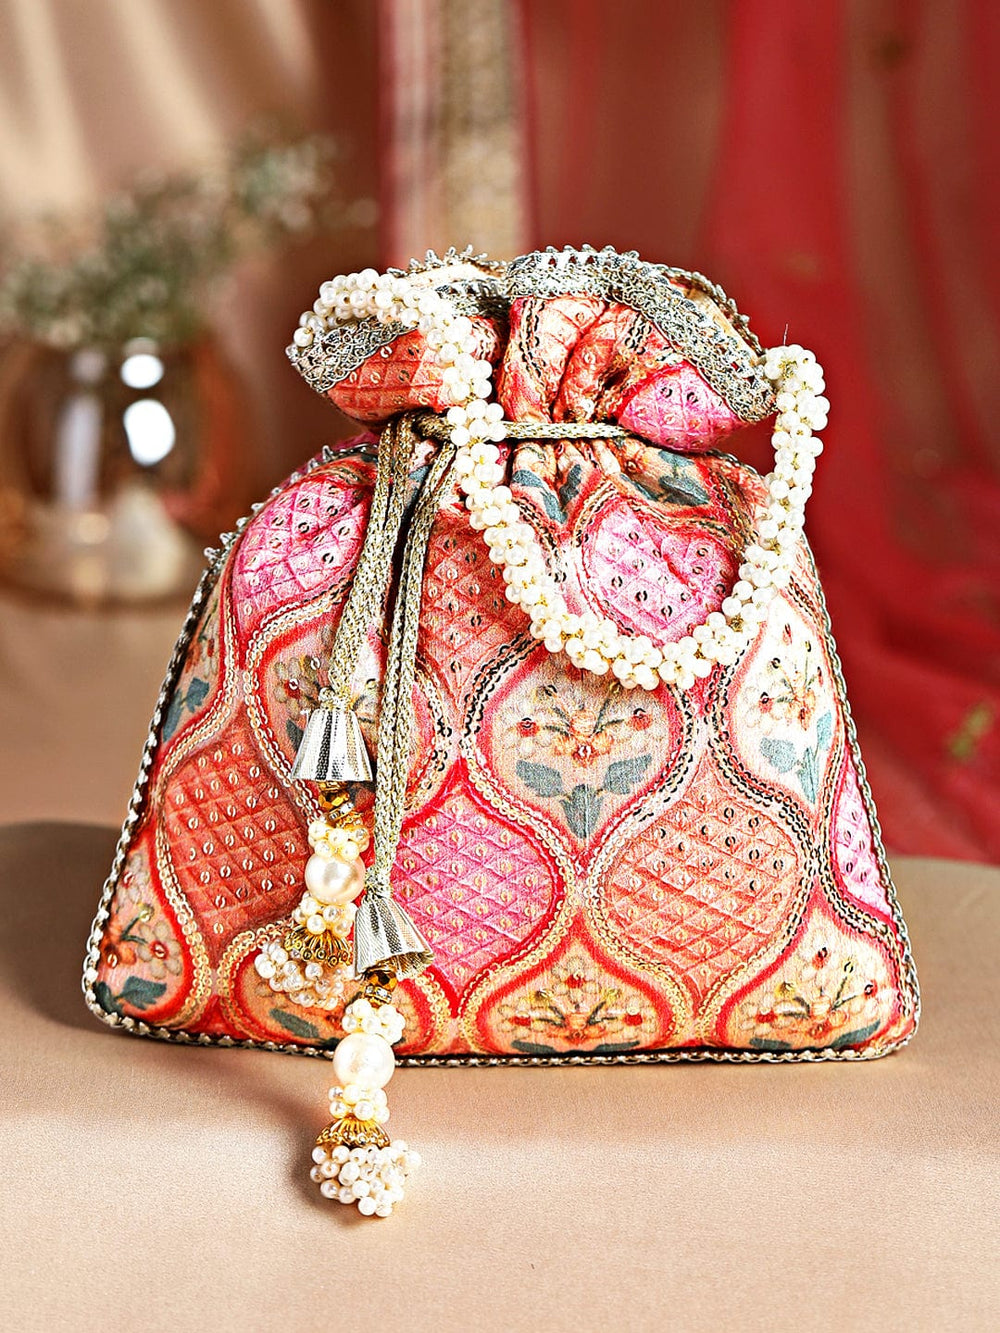 Rubans Pink And Orange Coloured Potlibag With Print And Pearls Handbag & Wallet Accessories